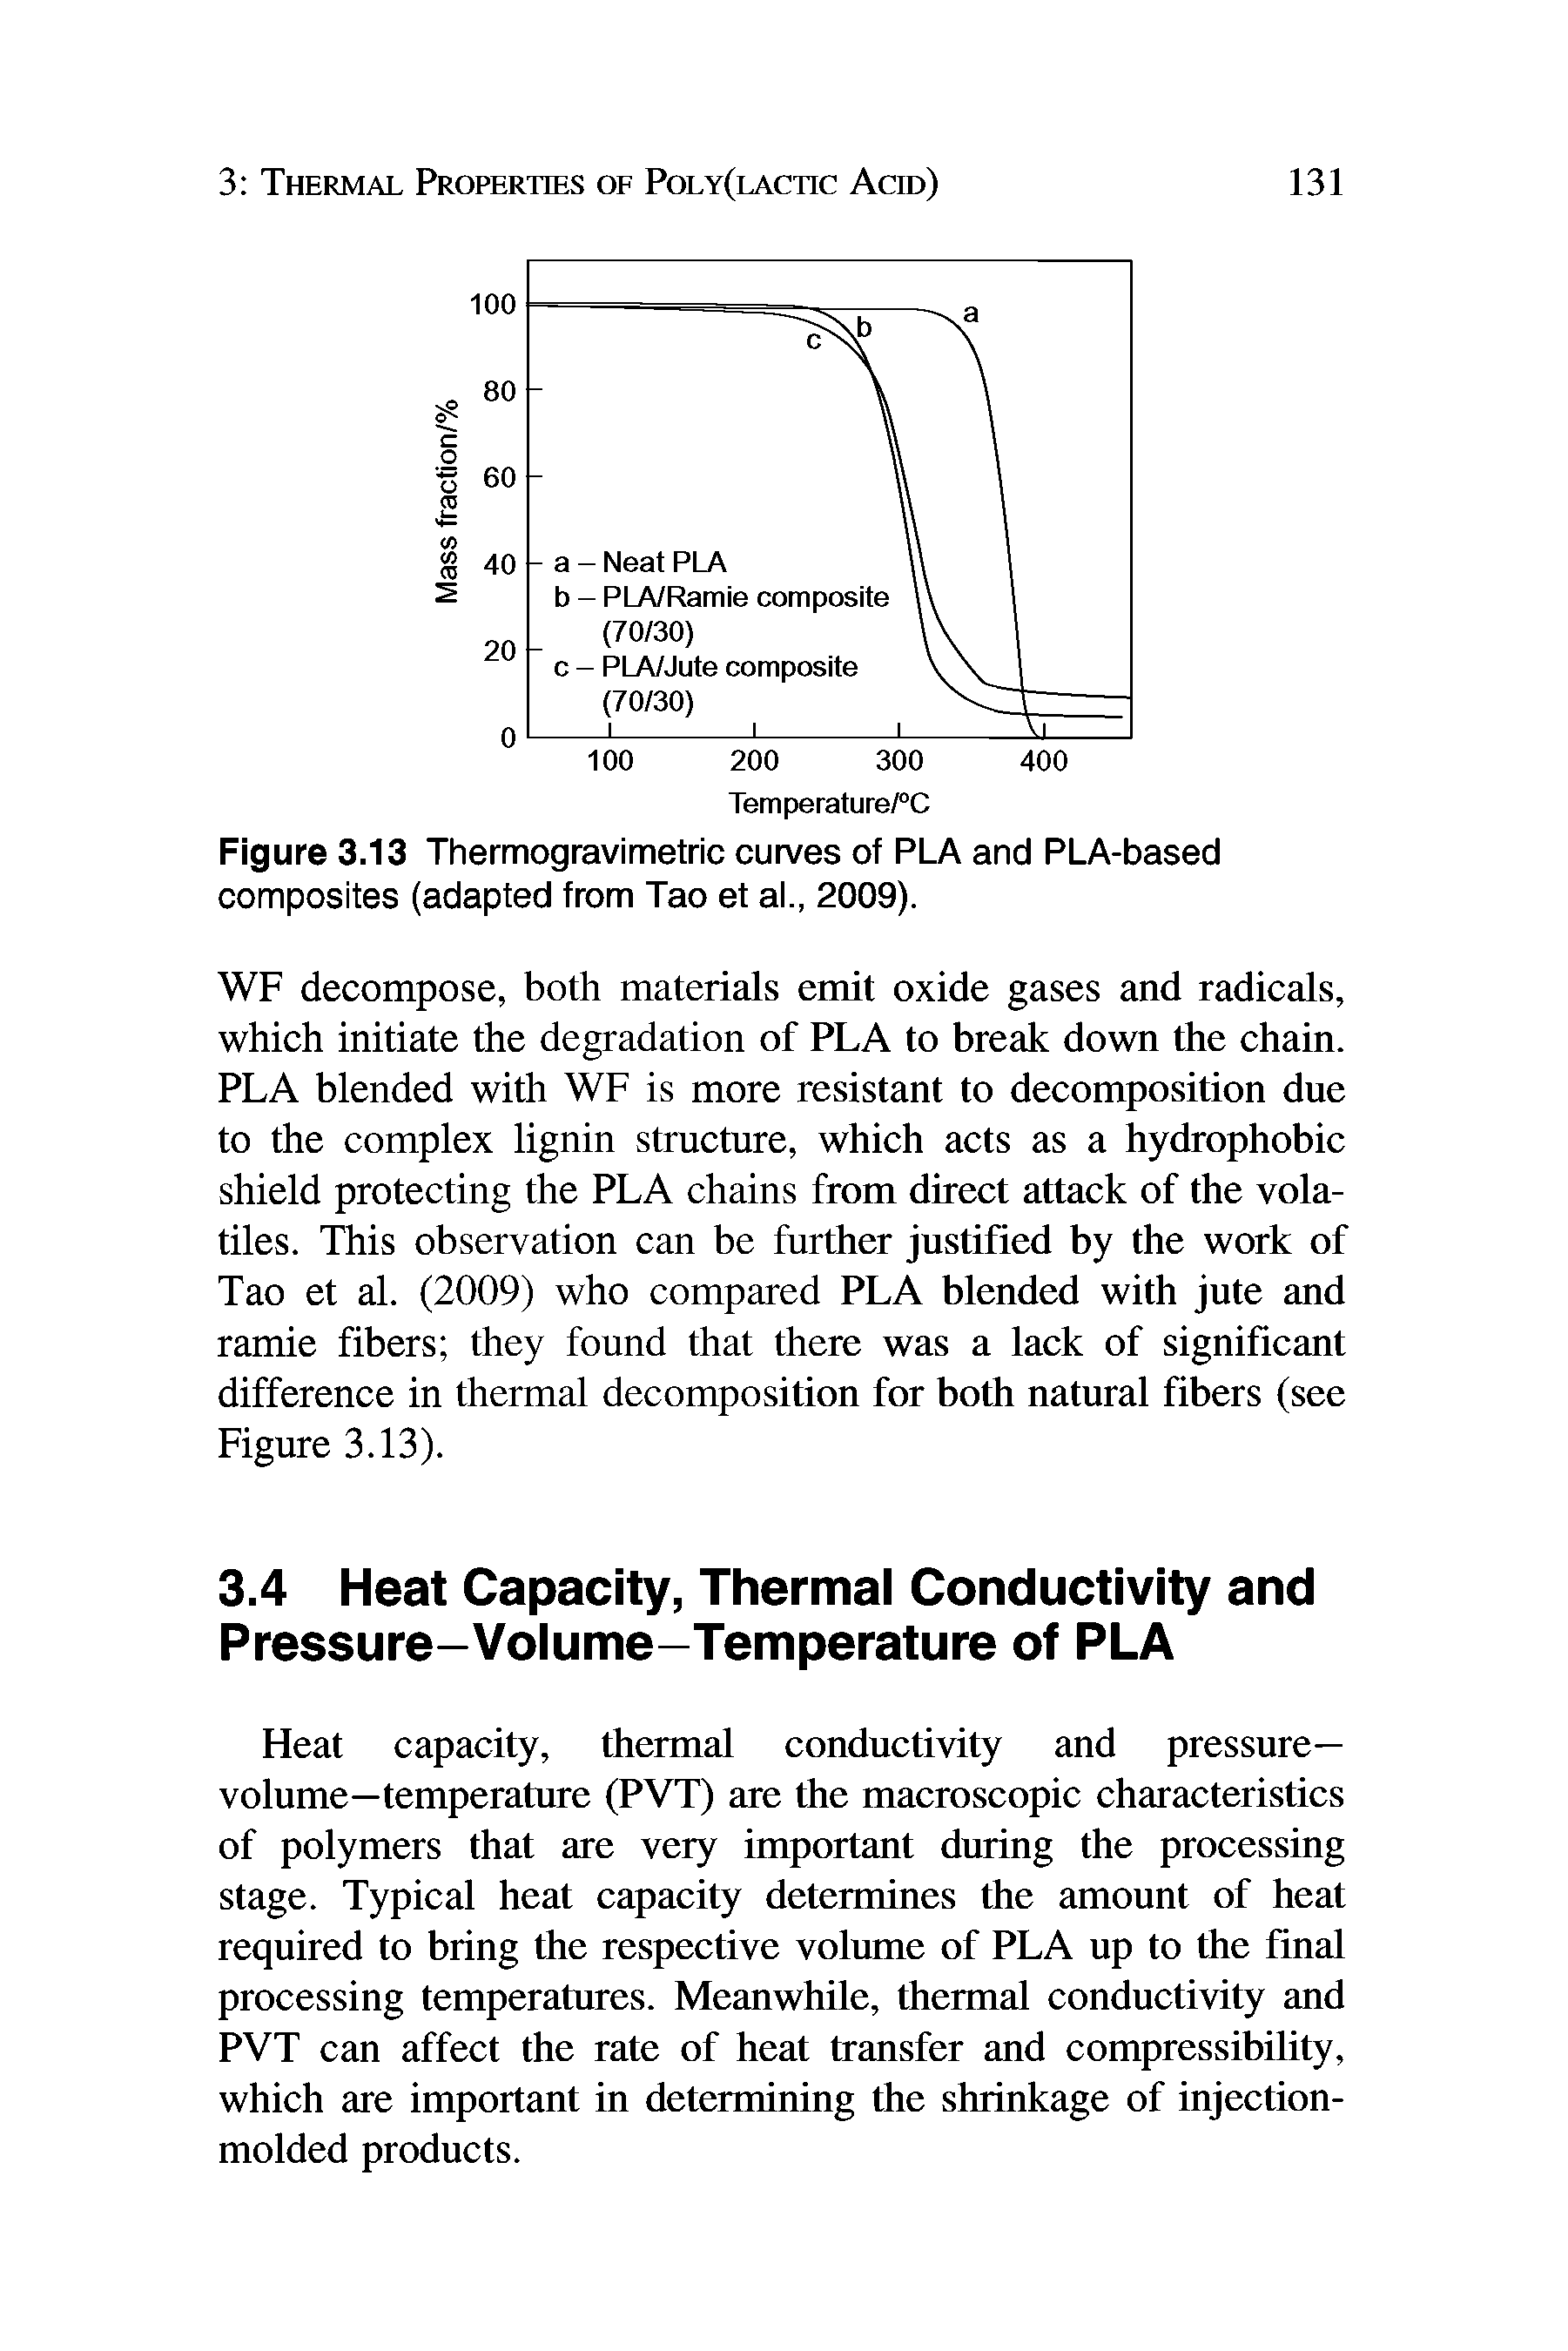 Figure 3.13 Thermogravimetric curves of PLA and PLA-based composites (adapted from Tao et al., 2009).